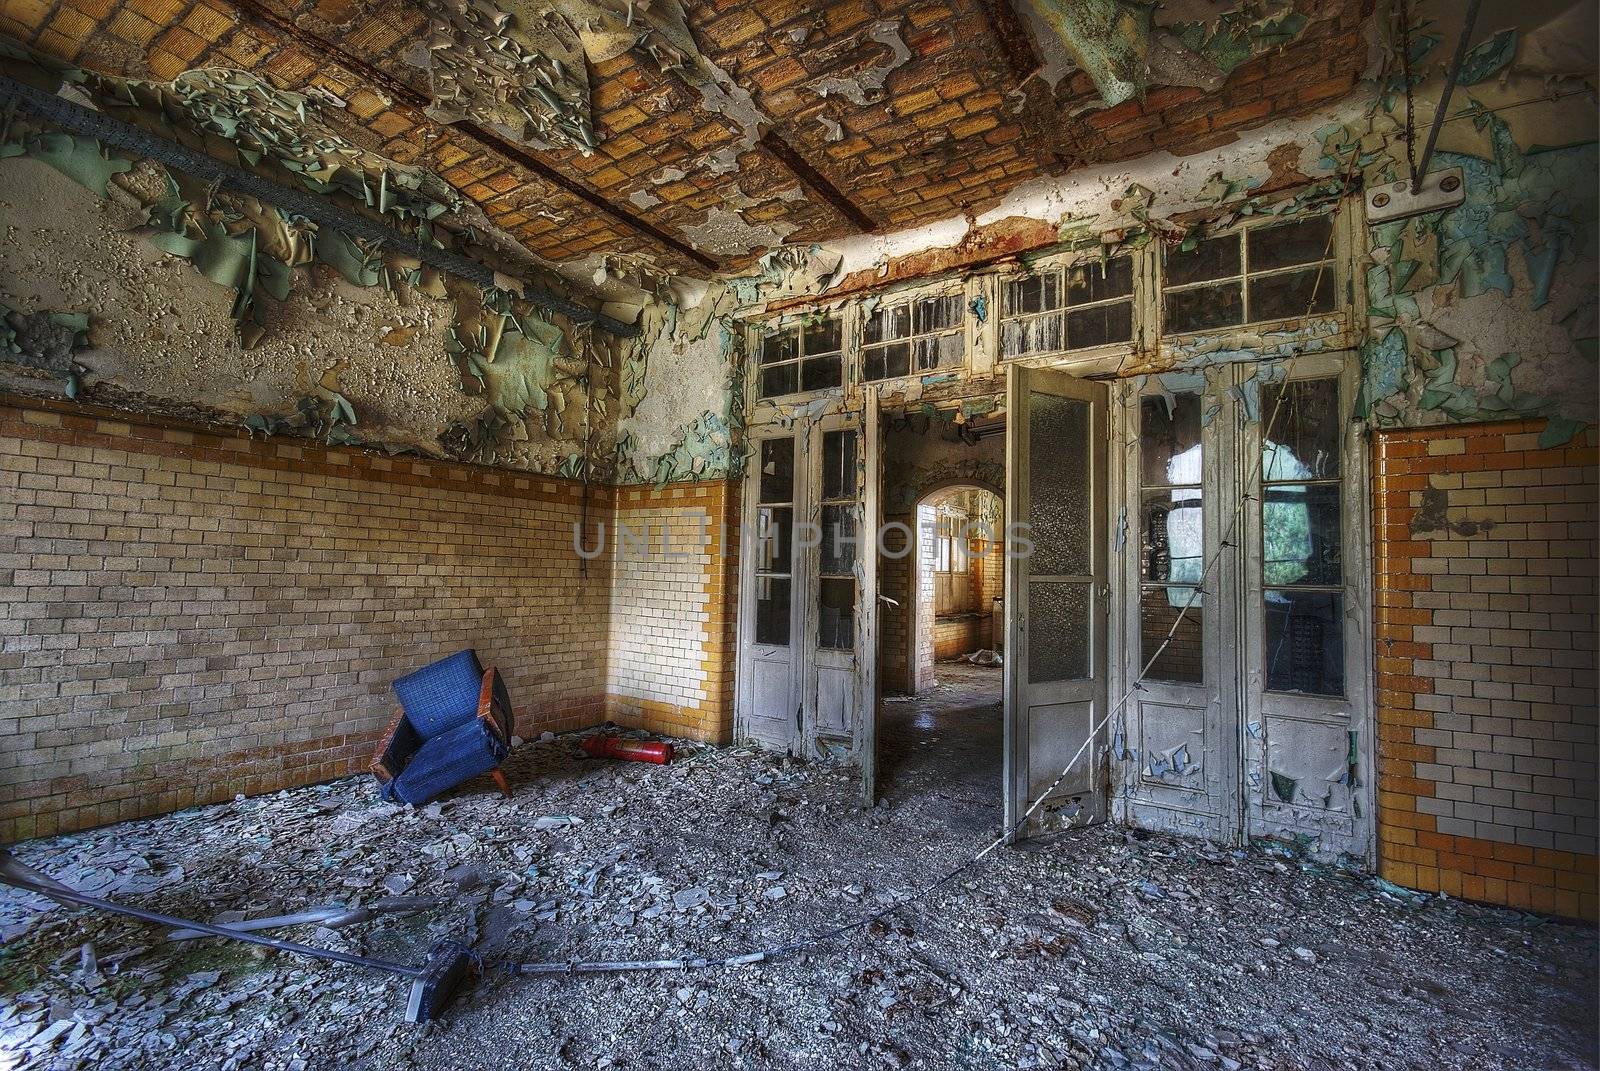 Room in an abandoned building with some furniture